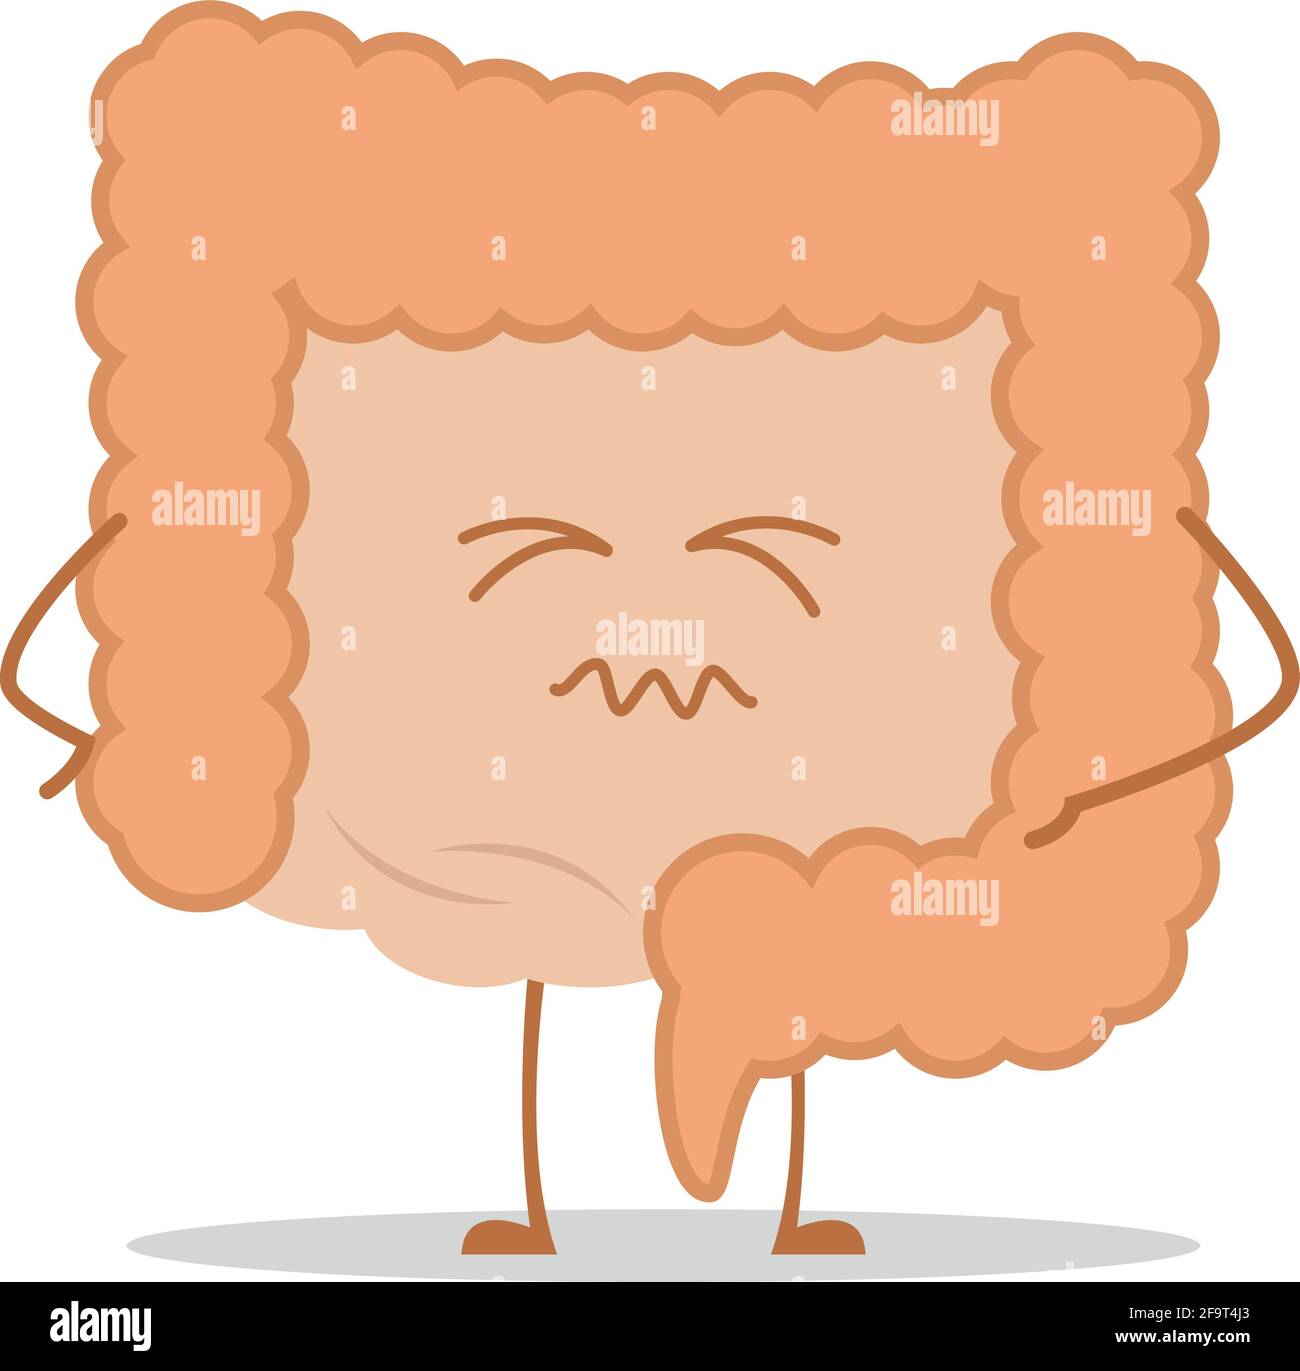 Vector illustration of a sick and sad intestine in cartoon style. Stock Vector